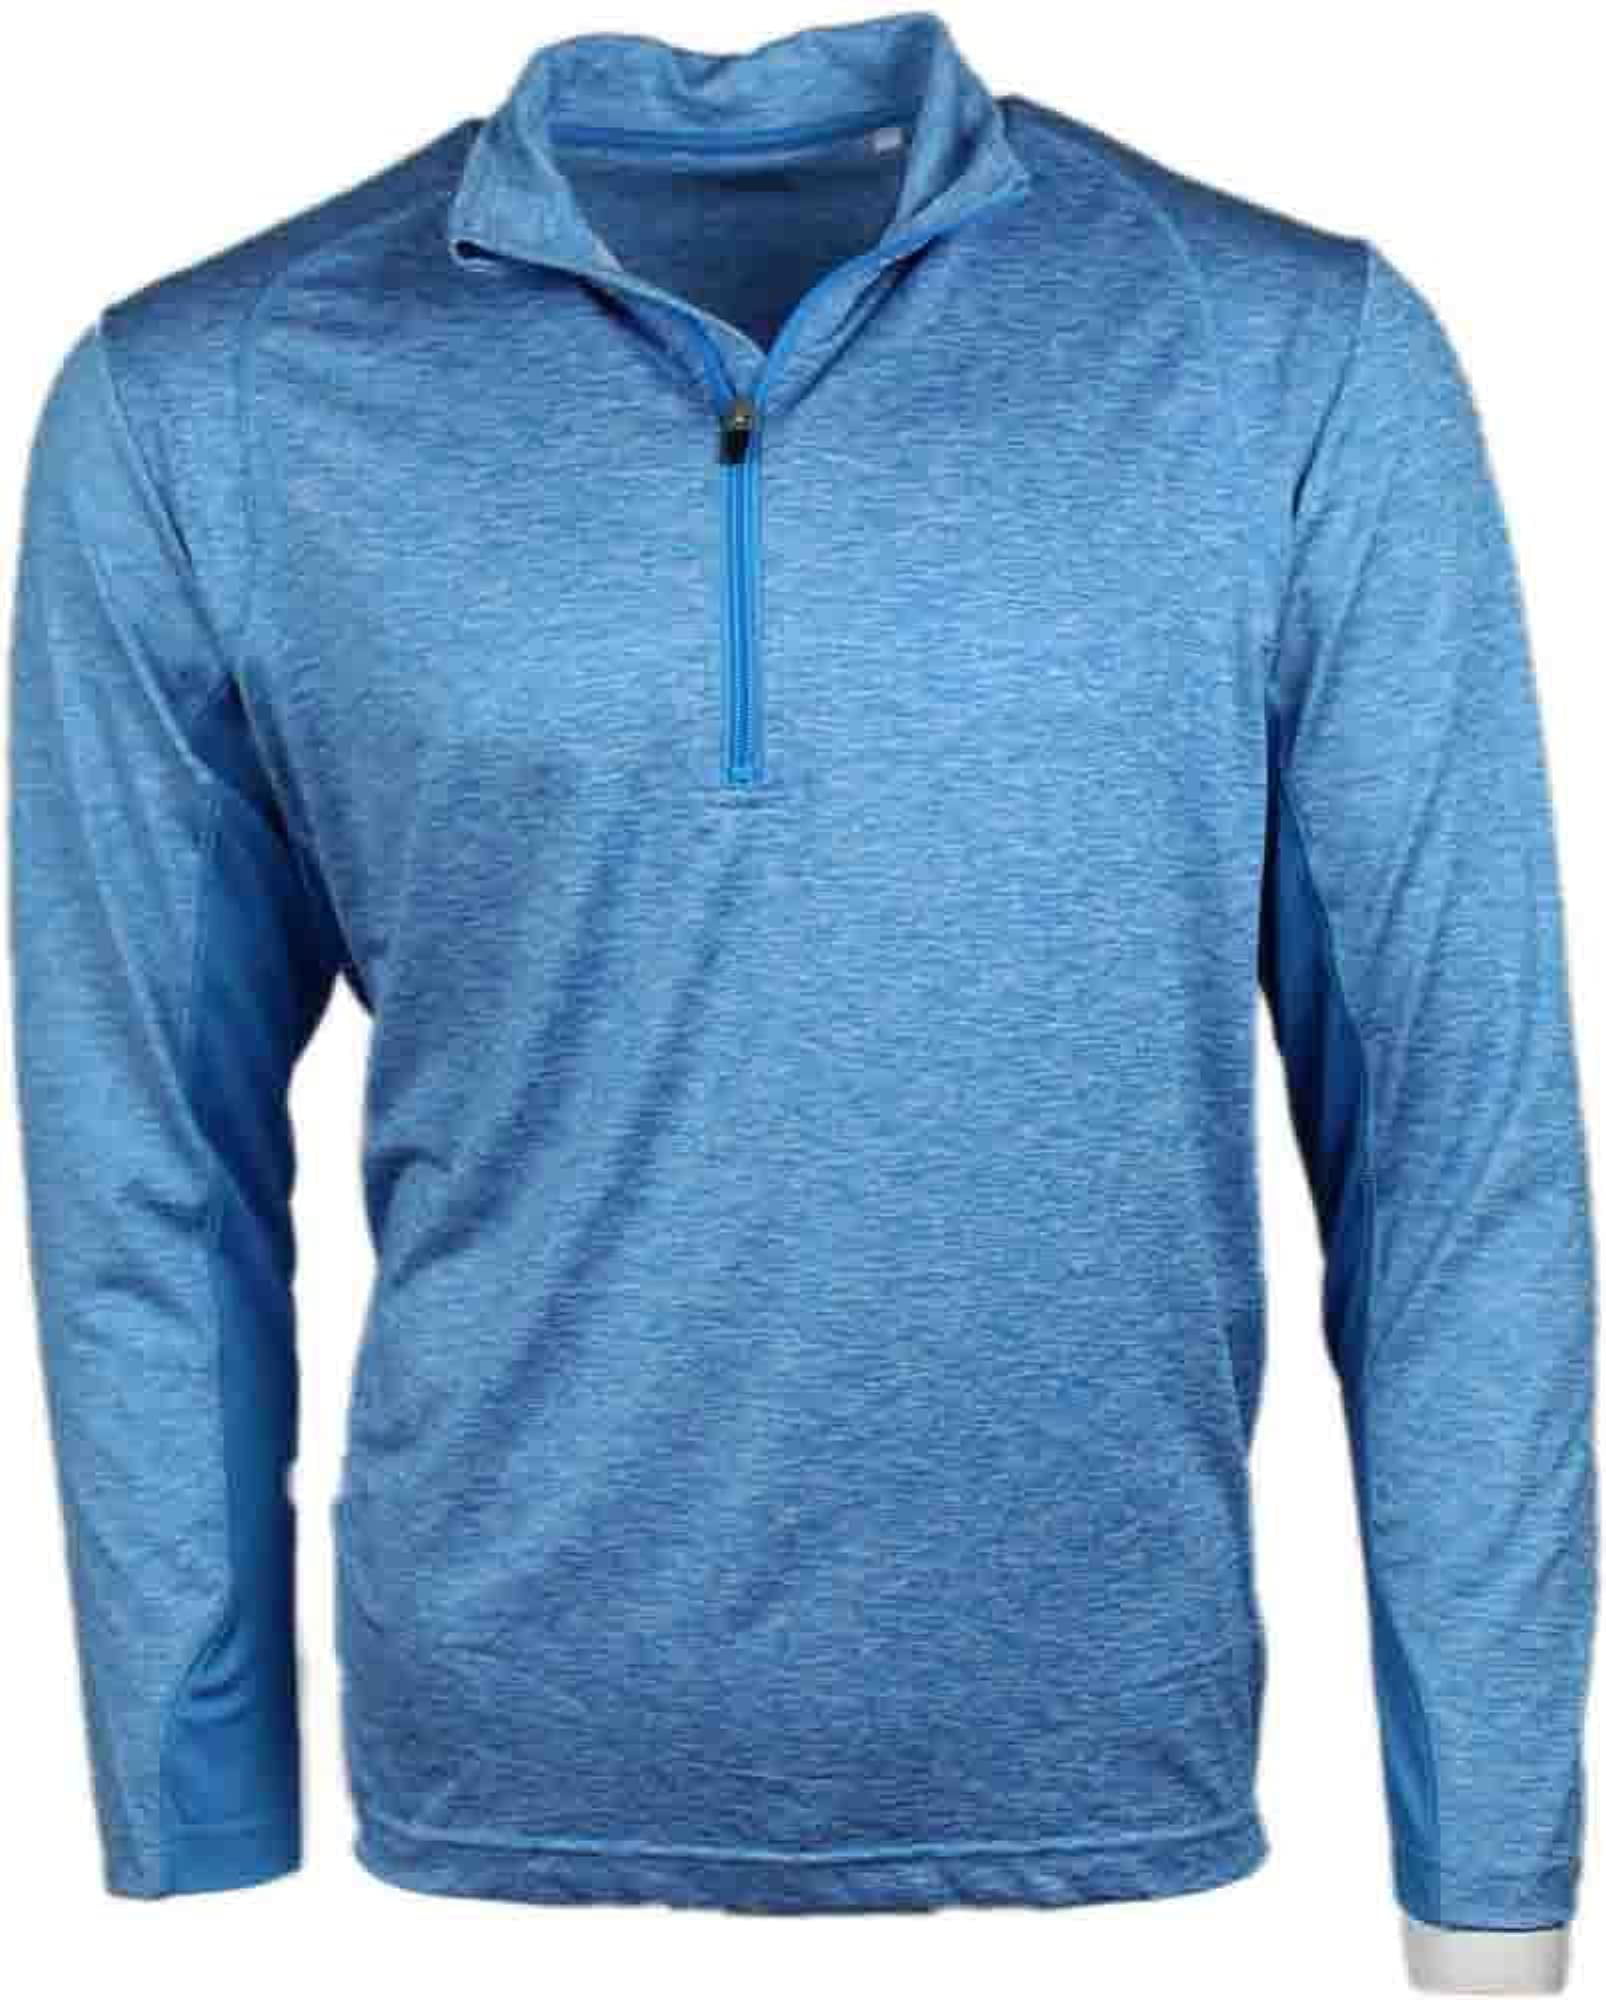 Page & Tuttle Heather Colorblock Quarter Zip Pullover  Athletic   Outerwear Grey 